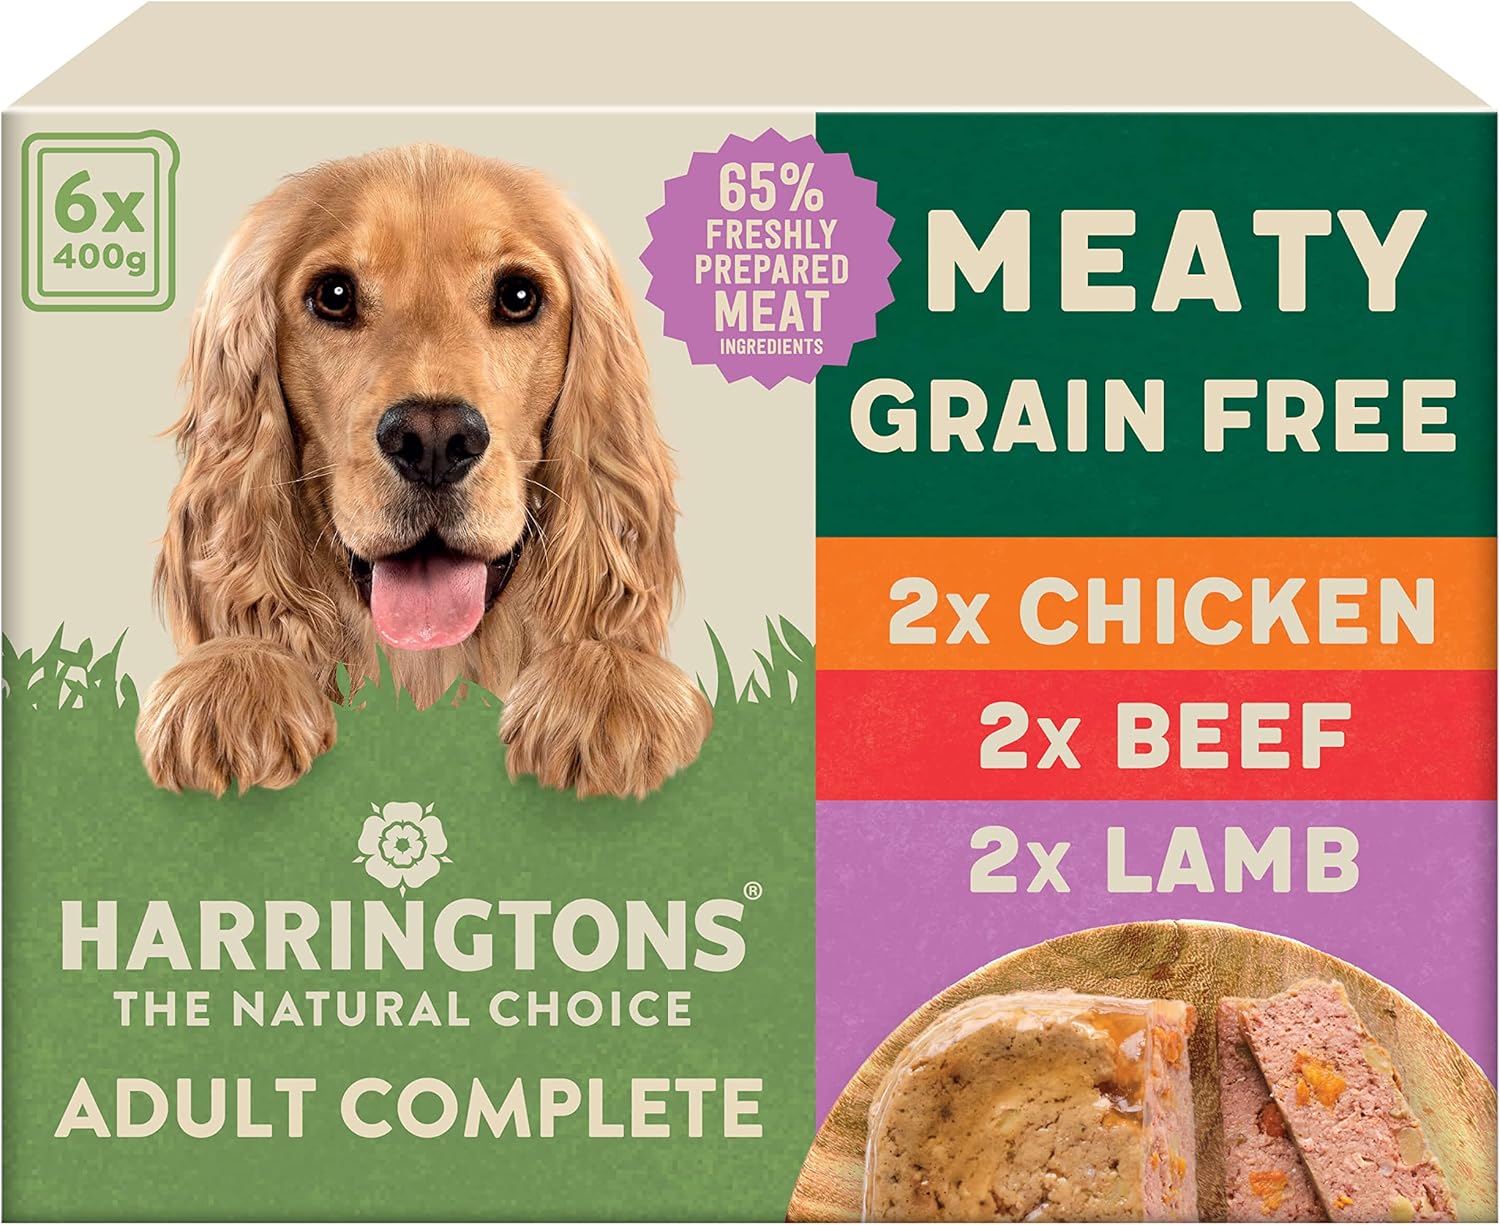 Harringtons Complete Wet Tray Grain Free Hypoallergenic Adult Dog Food Meaty Pack 6x400g - Chicken, Beef & Lamb - Made with All Natural Ingredients?HARRWM-C400